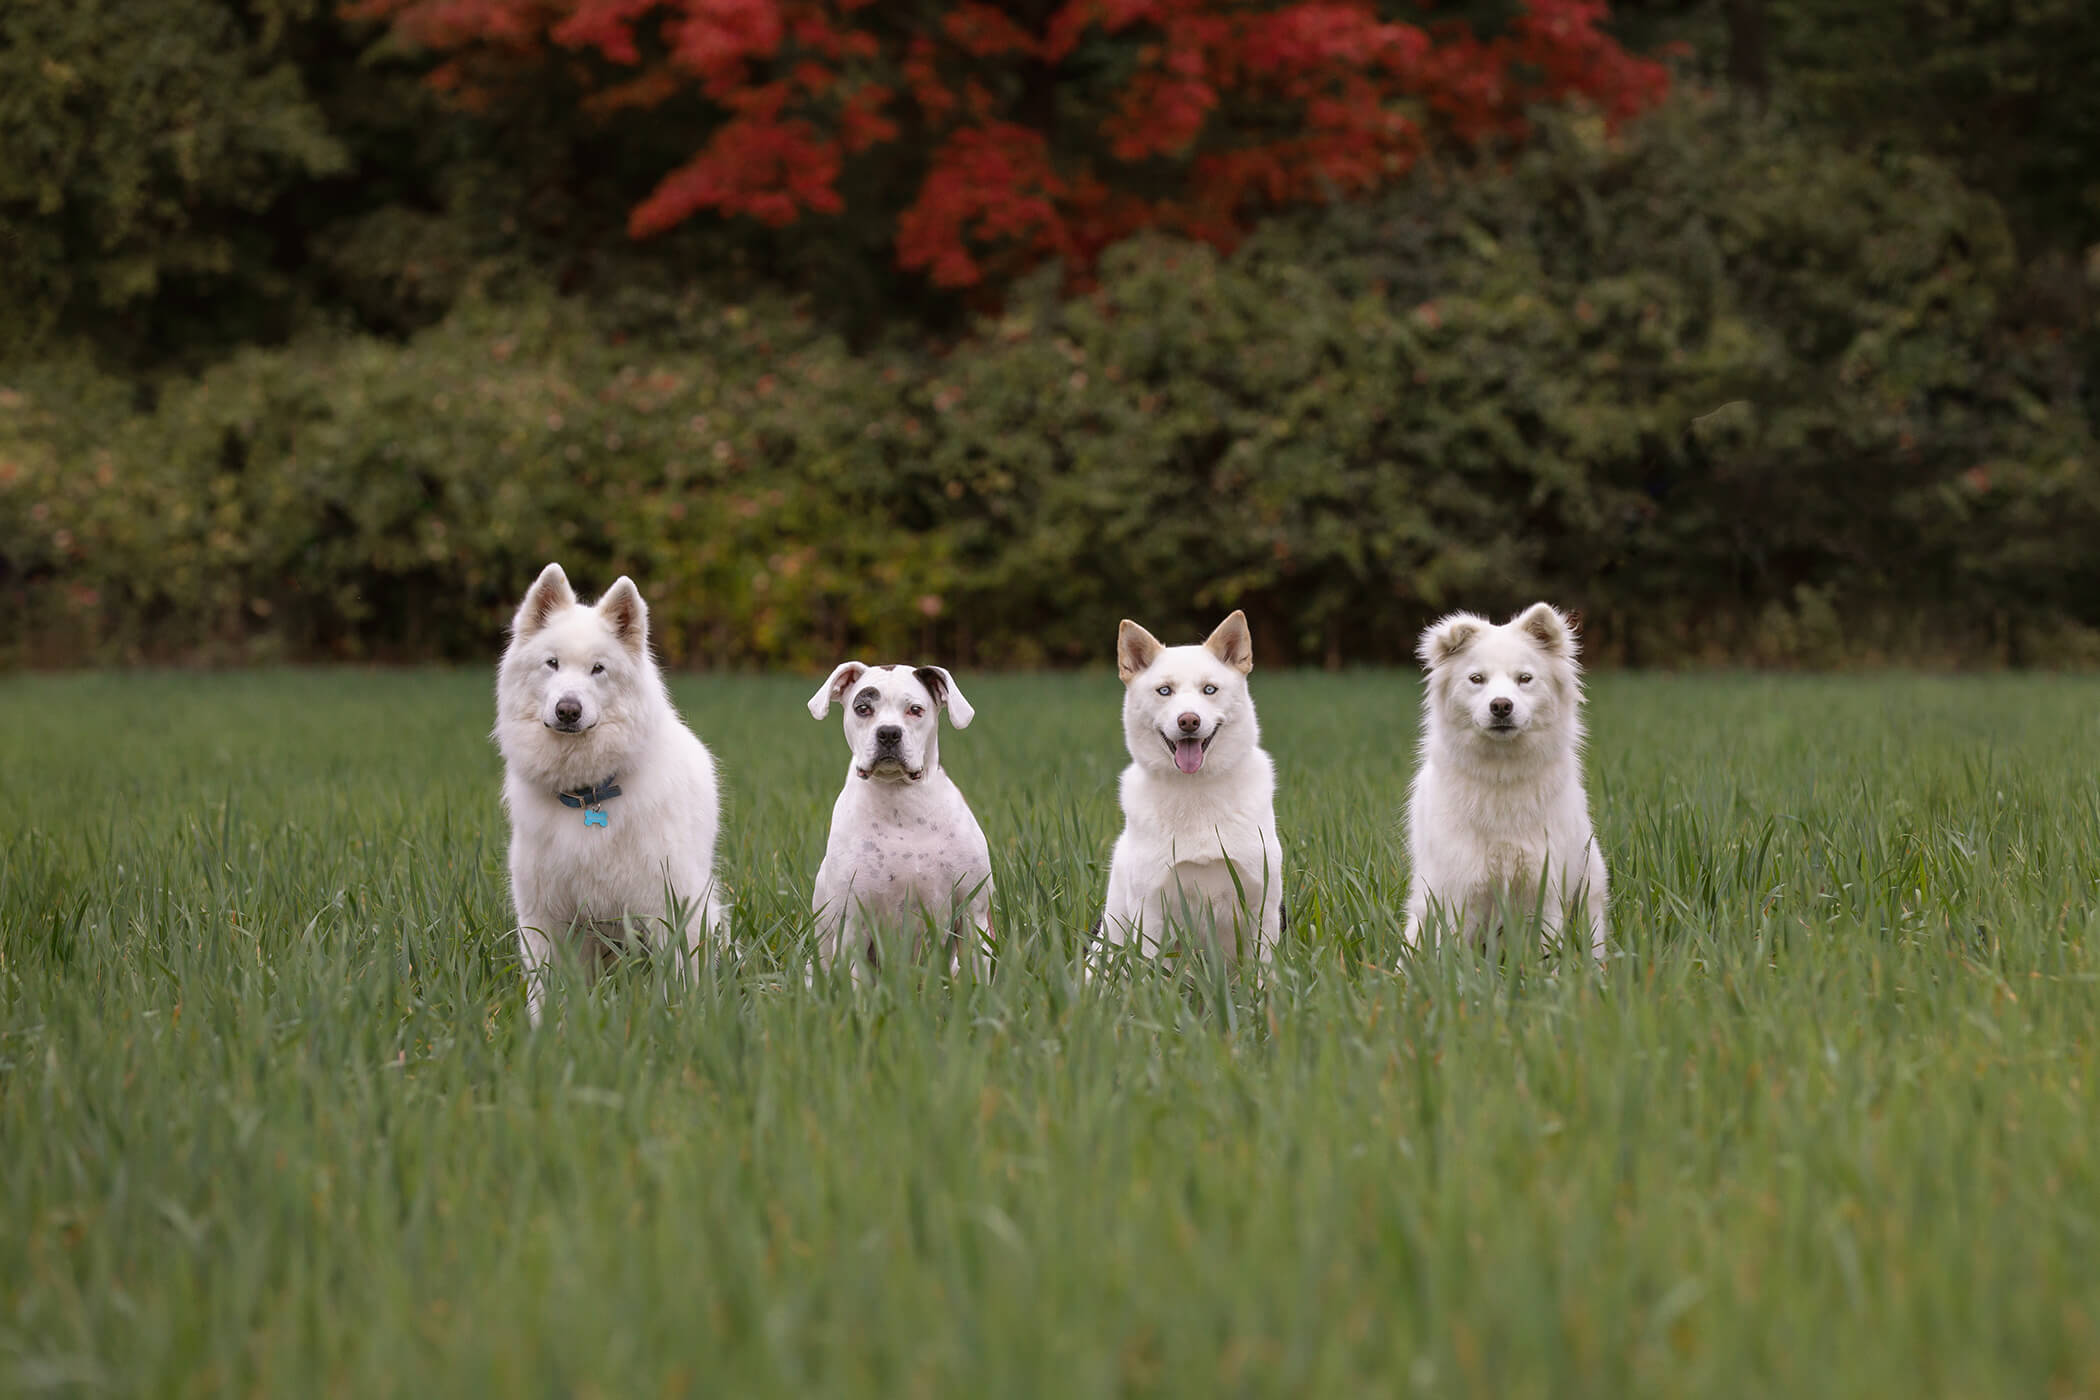 4 white dogs in a row